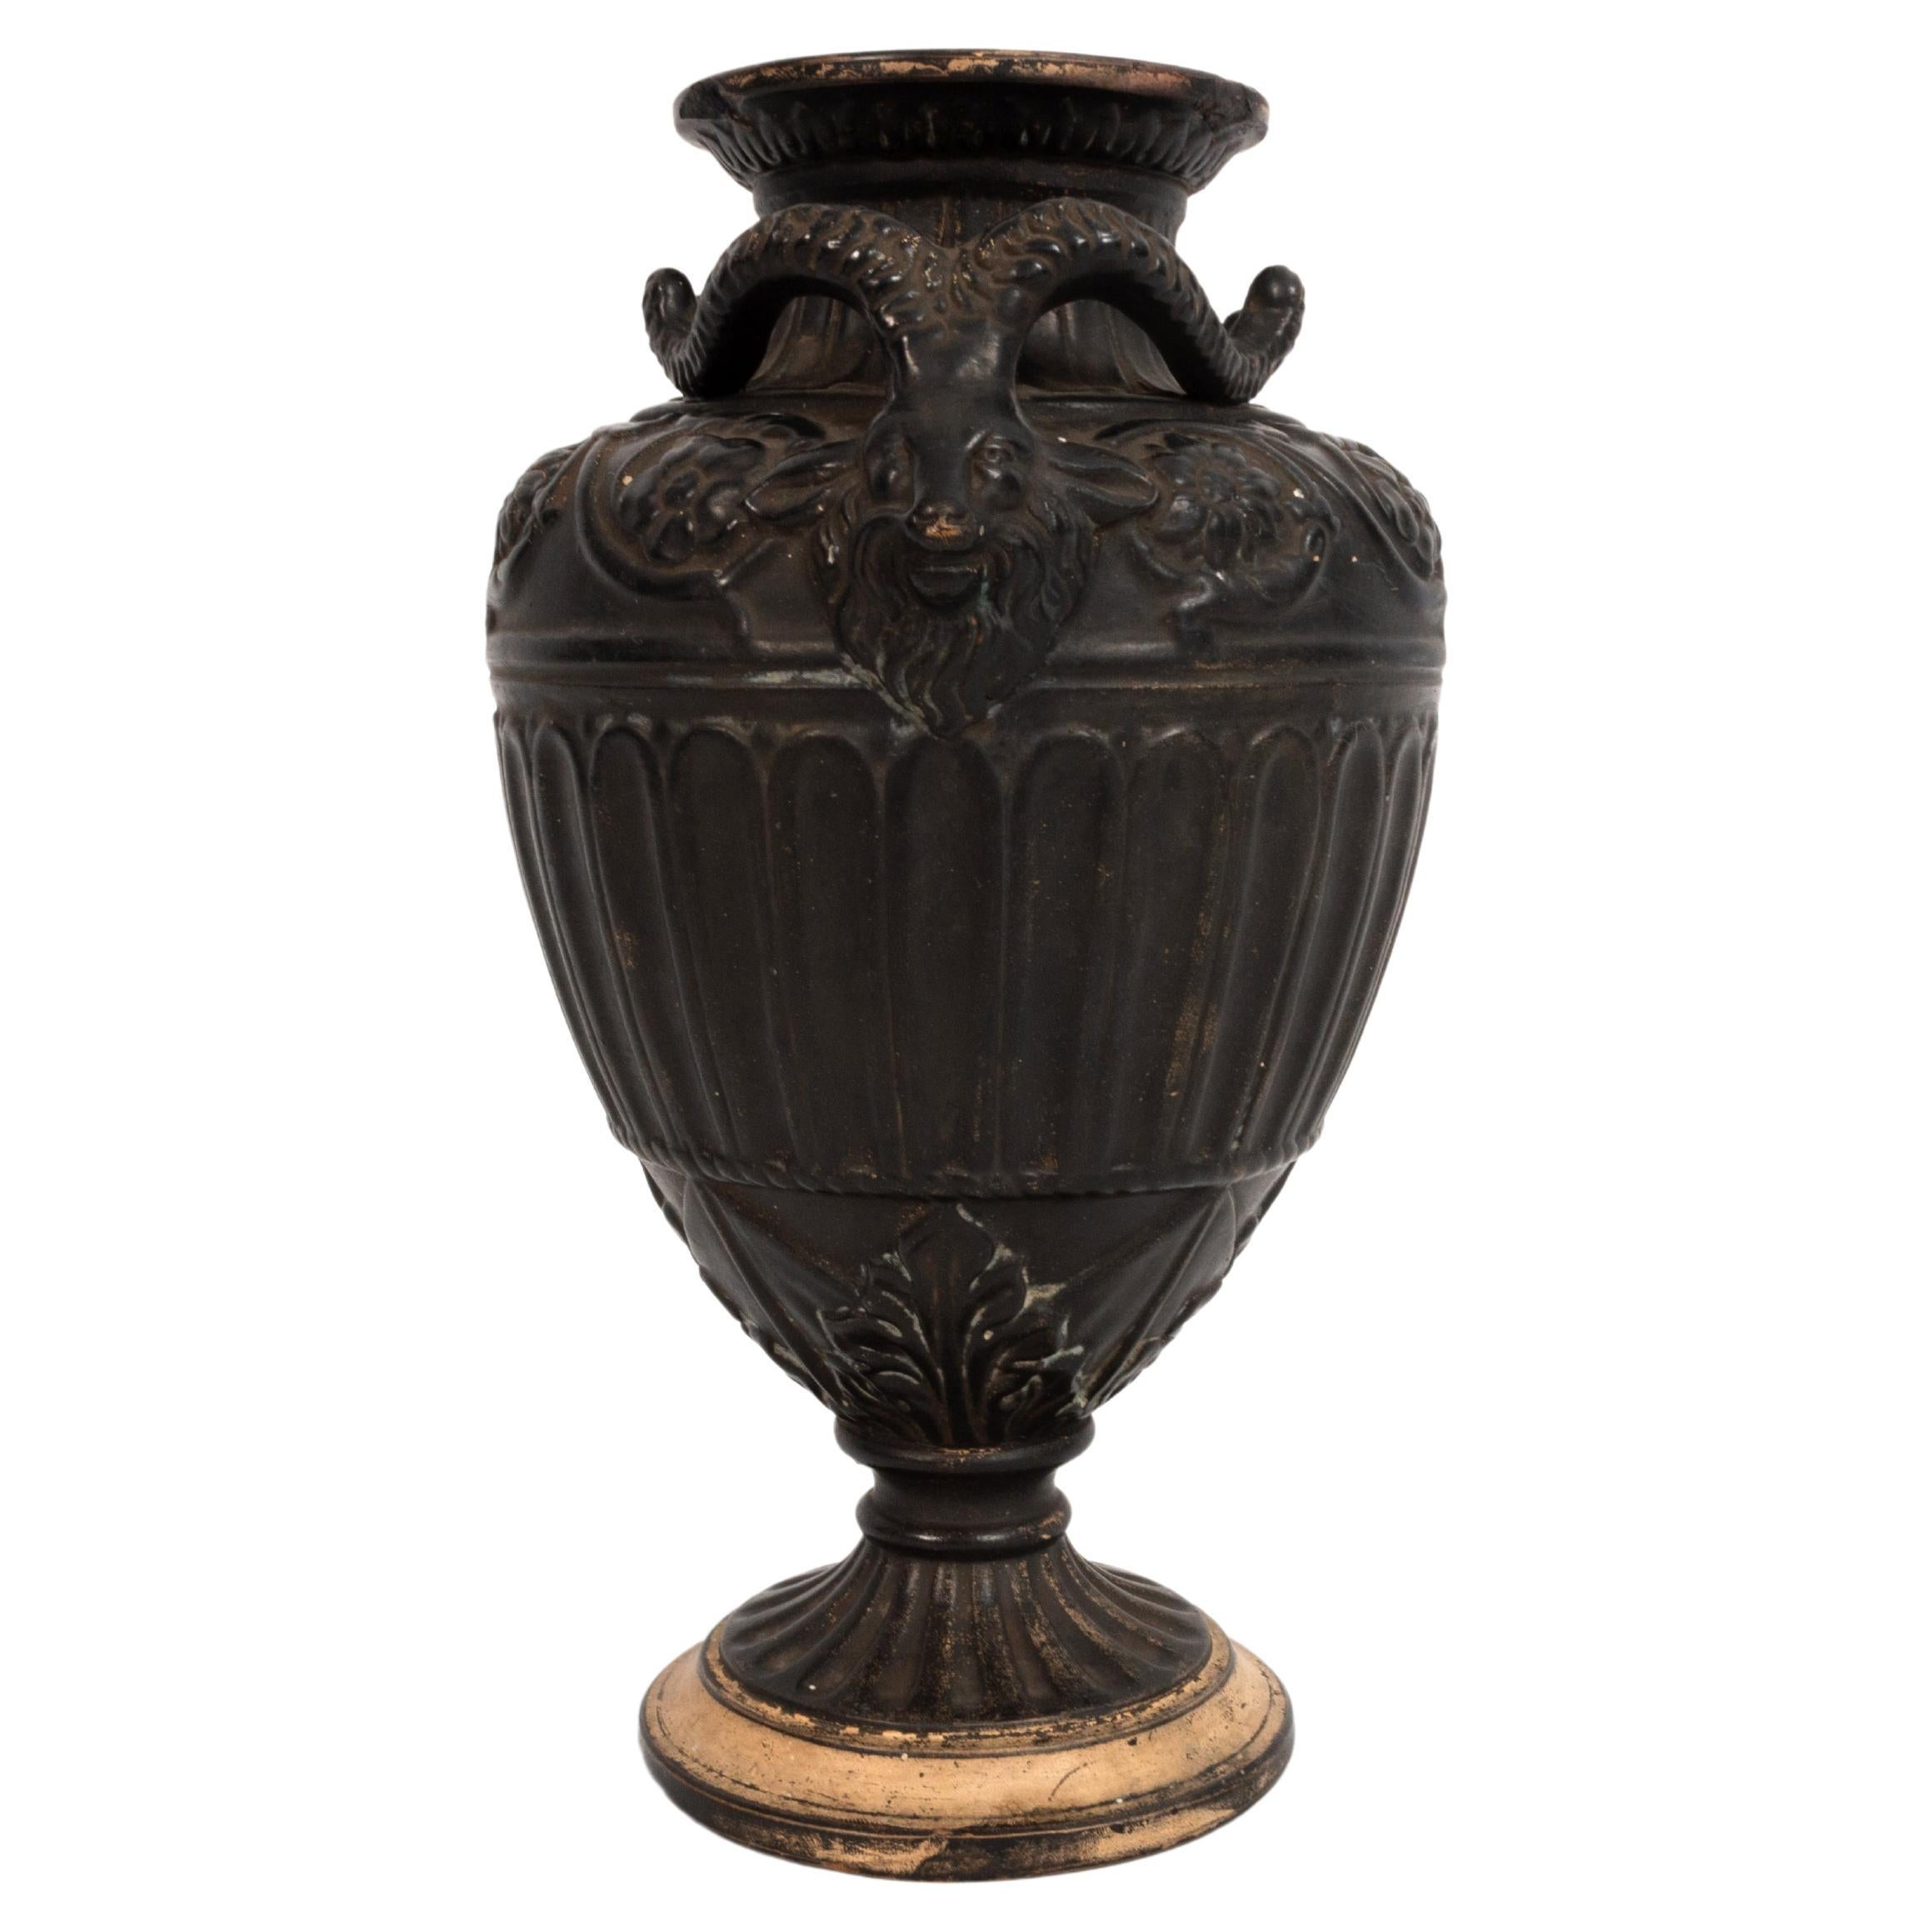 Antique 19th Century Neoclassical Vase By Gerbing & Stephan, Germany, 1892